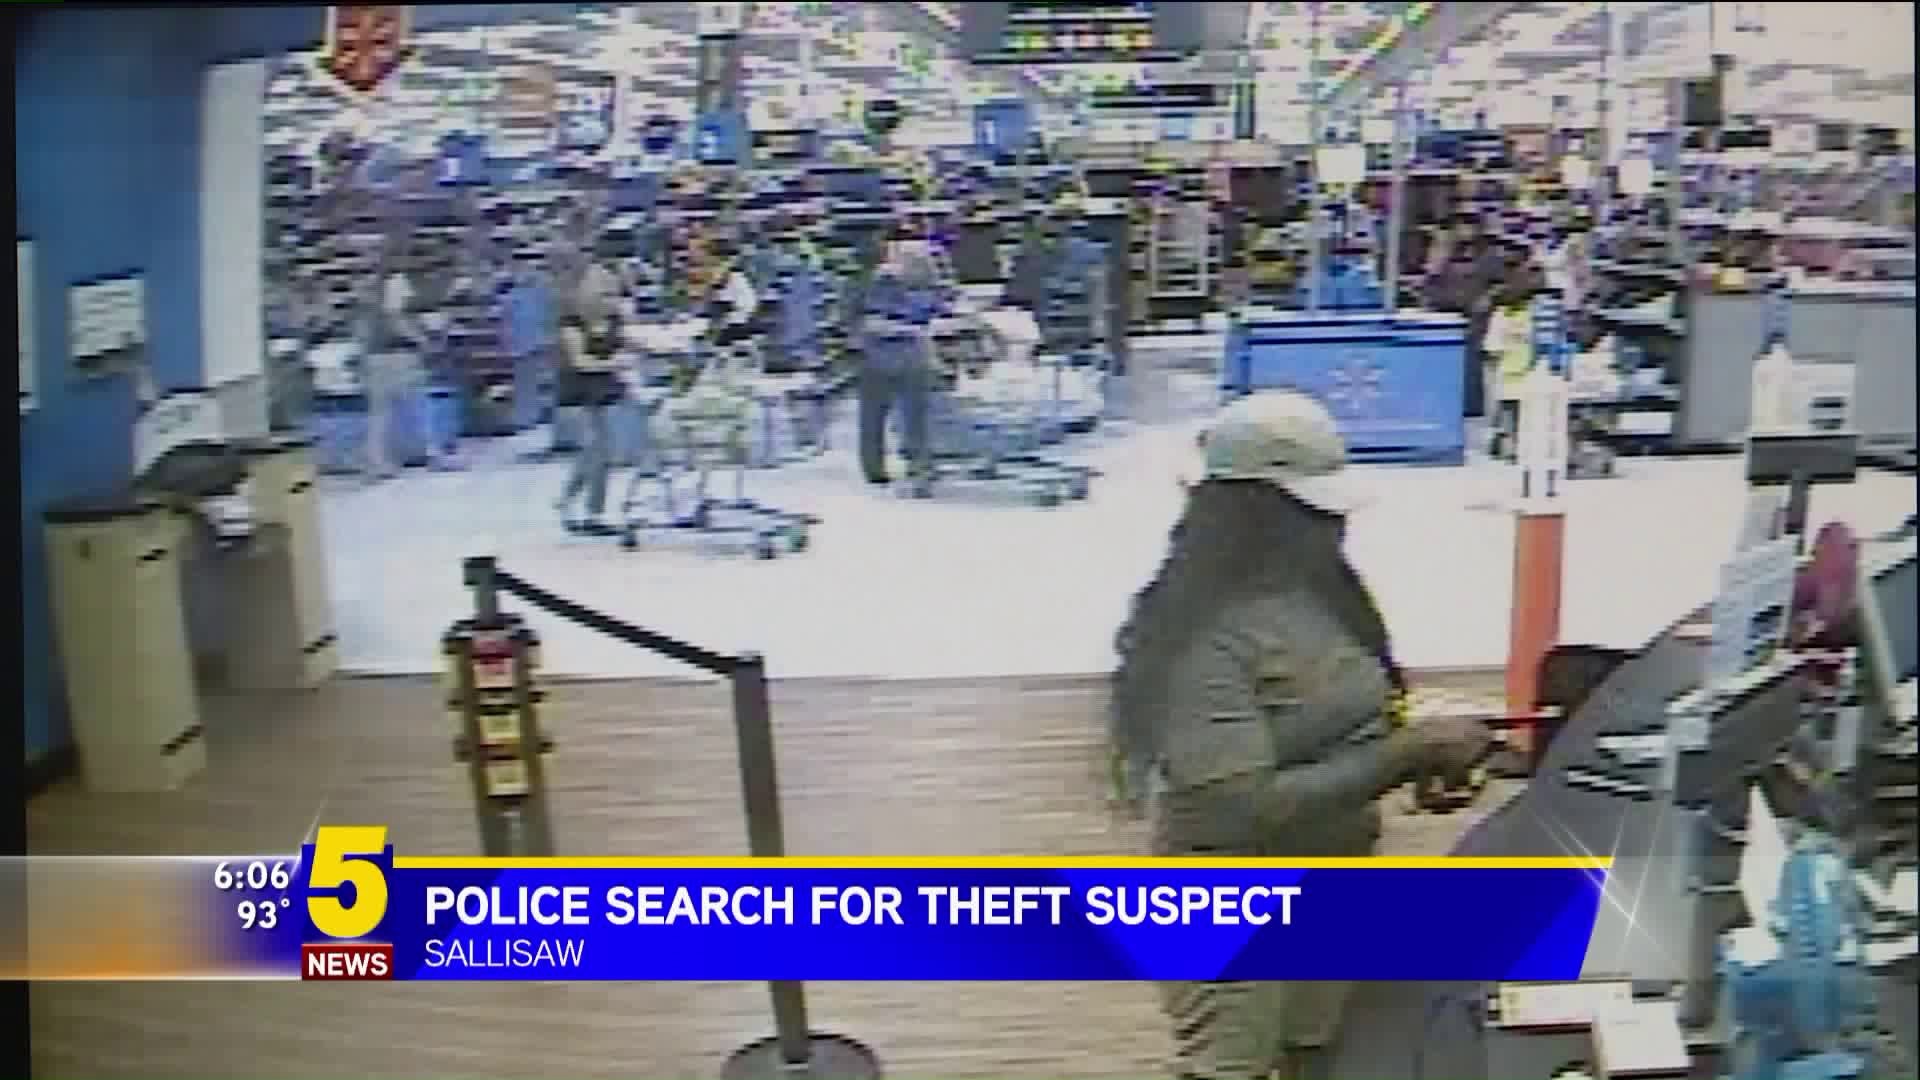 Police Search For Theft Suspect